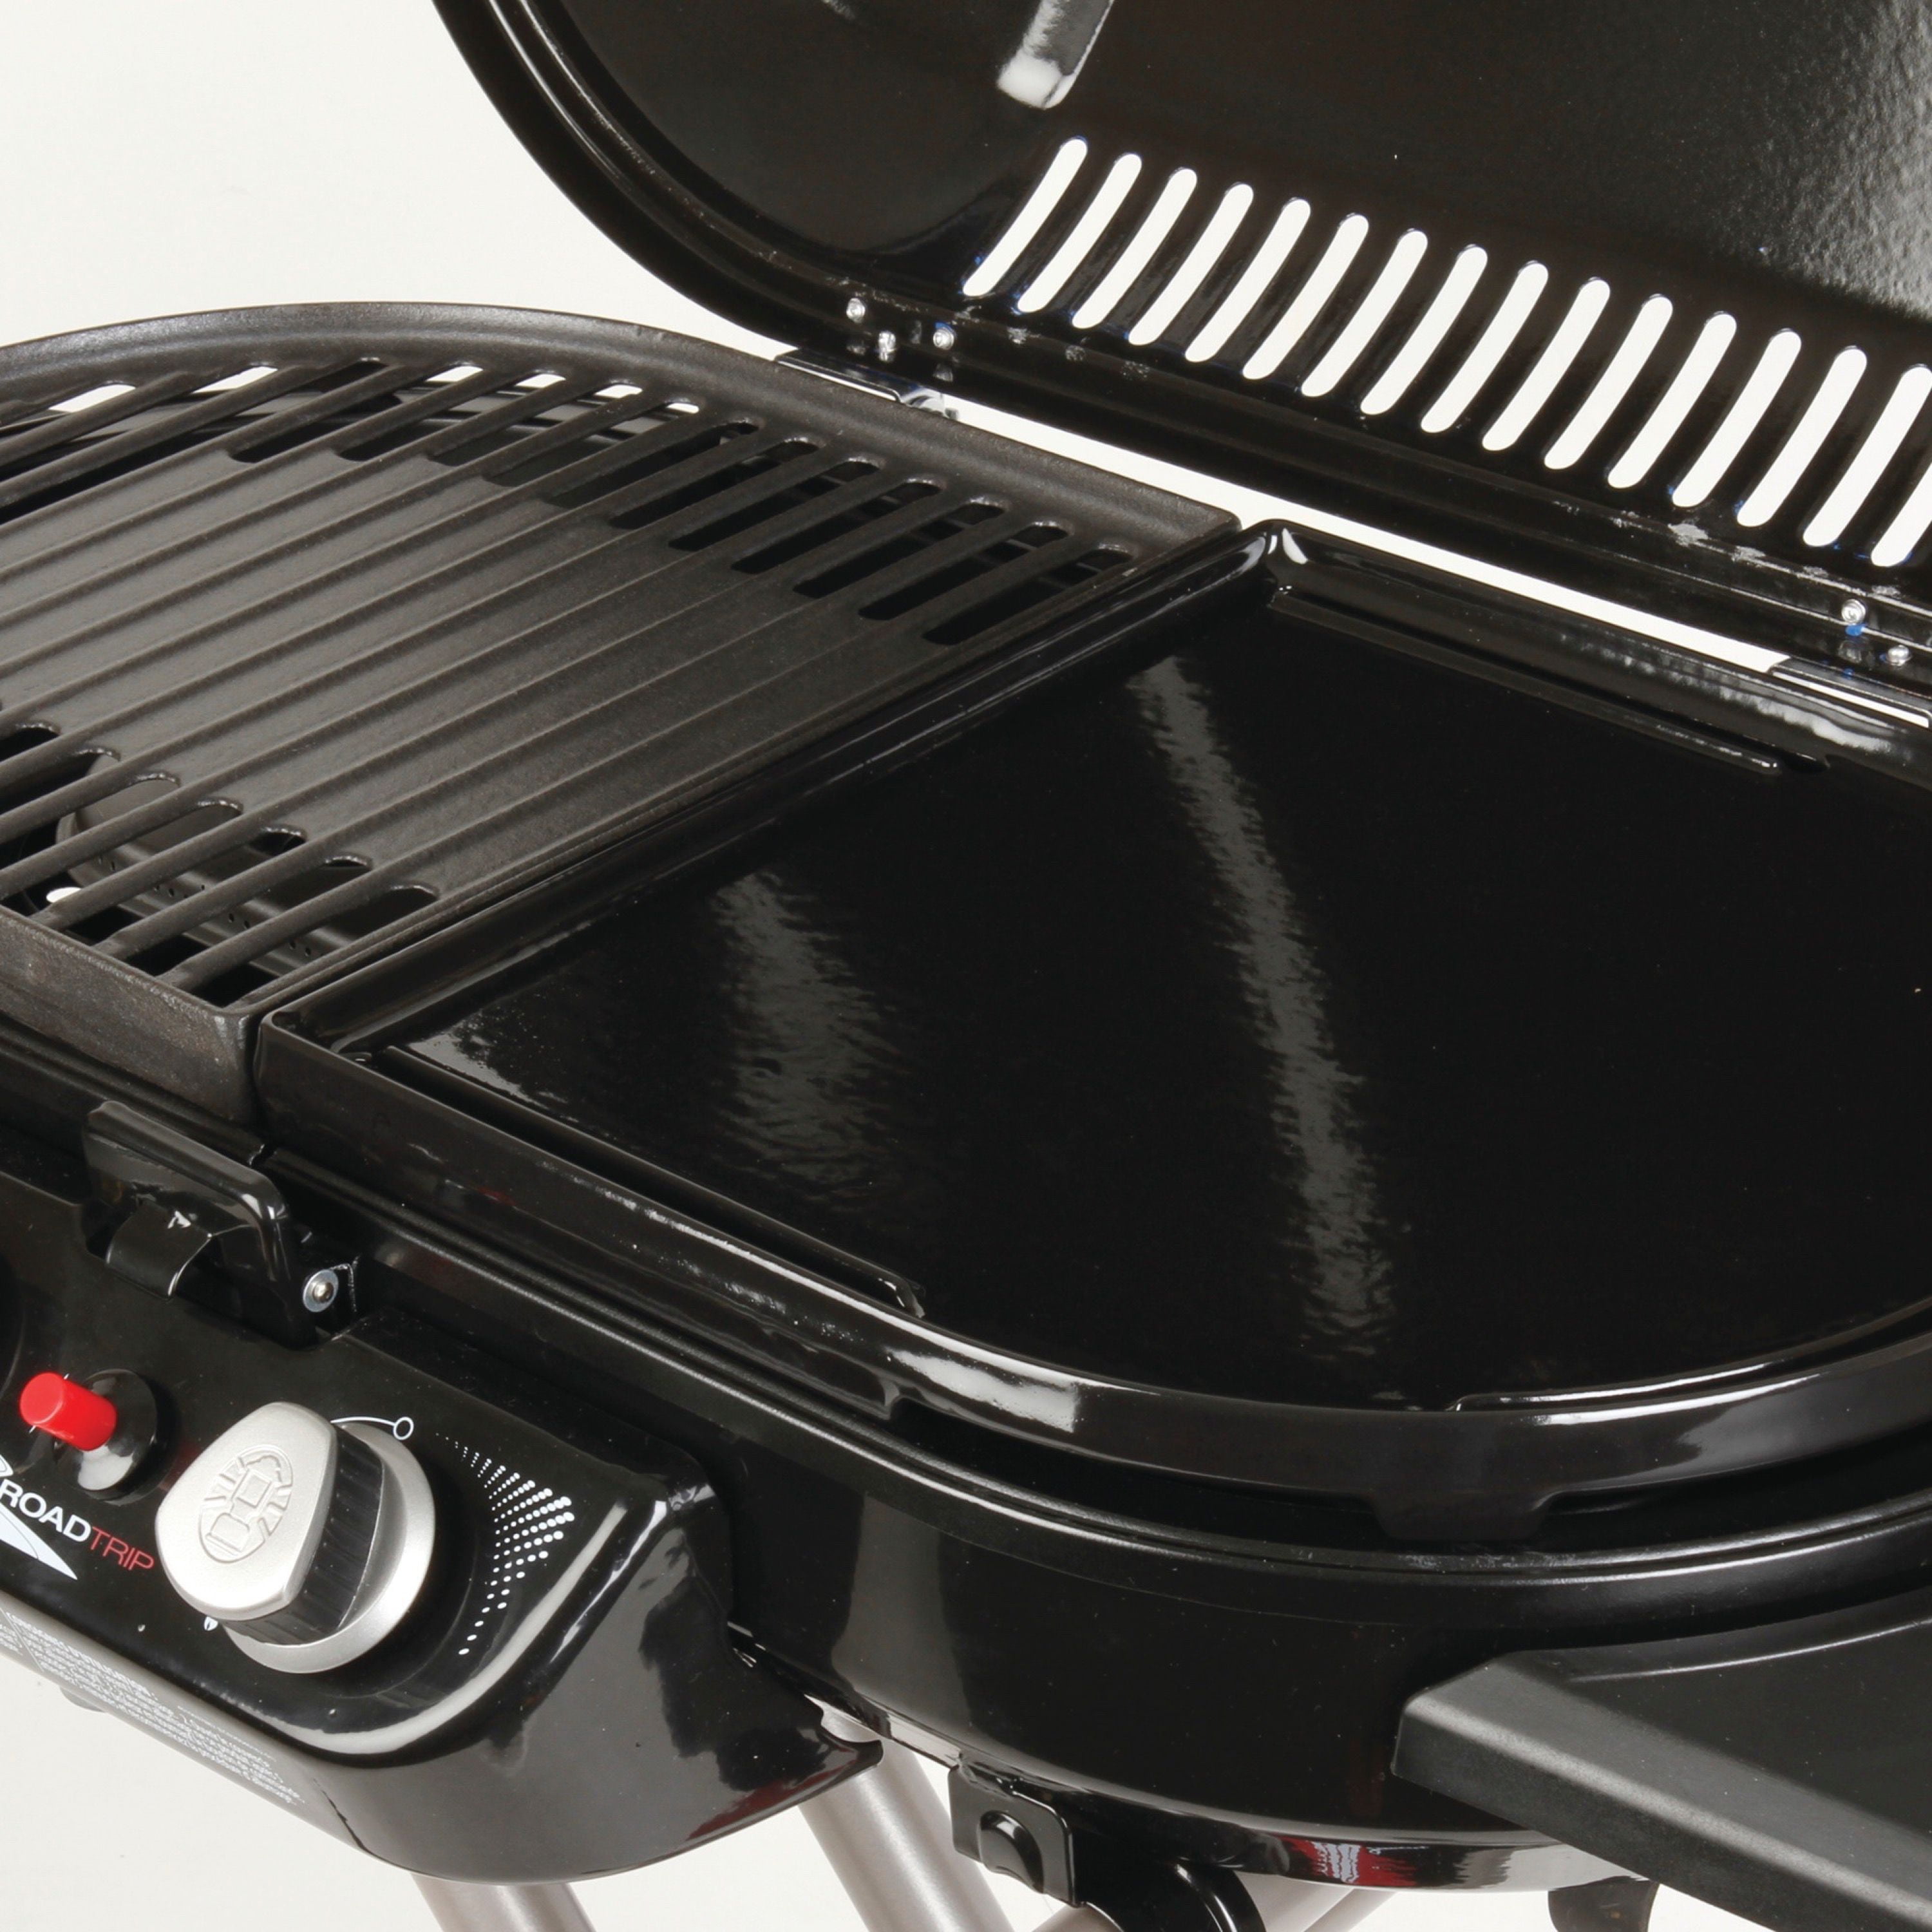 Full Size bbq777 Cast Iron Griddle and Carry Bag Replacement Kit for Coleman Roadtrip Swaptop Grill Griddle 